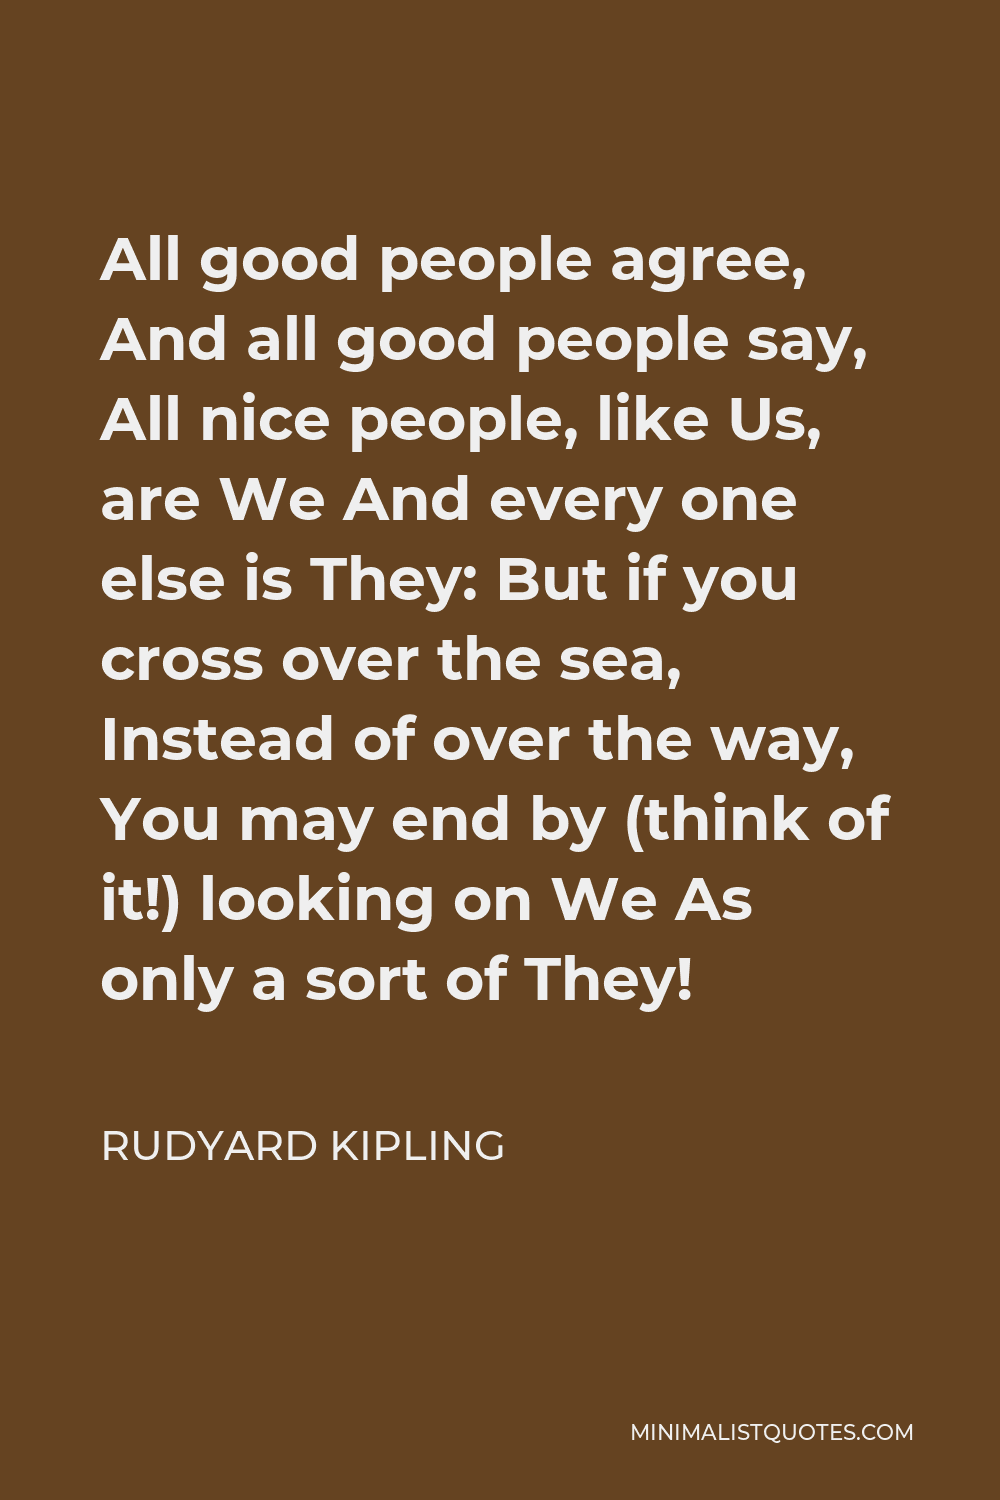 Rudyard Kipling Quote - All good people agree, And all good people say, All nice people, like Us, are We And every one else is They: But if you cross over the sea, Instead of over the way, You may end by (think of it!) looking on We As only a sort of They!